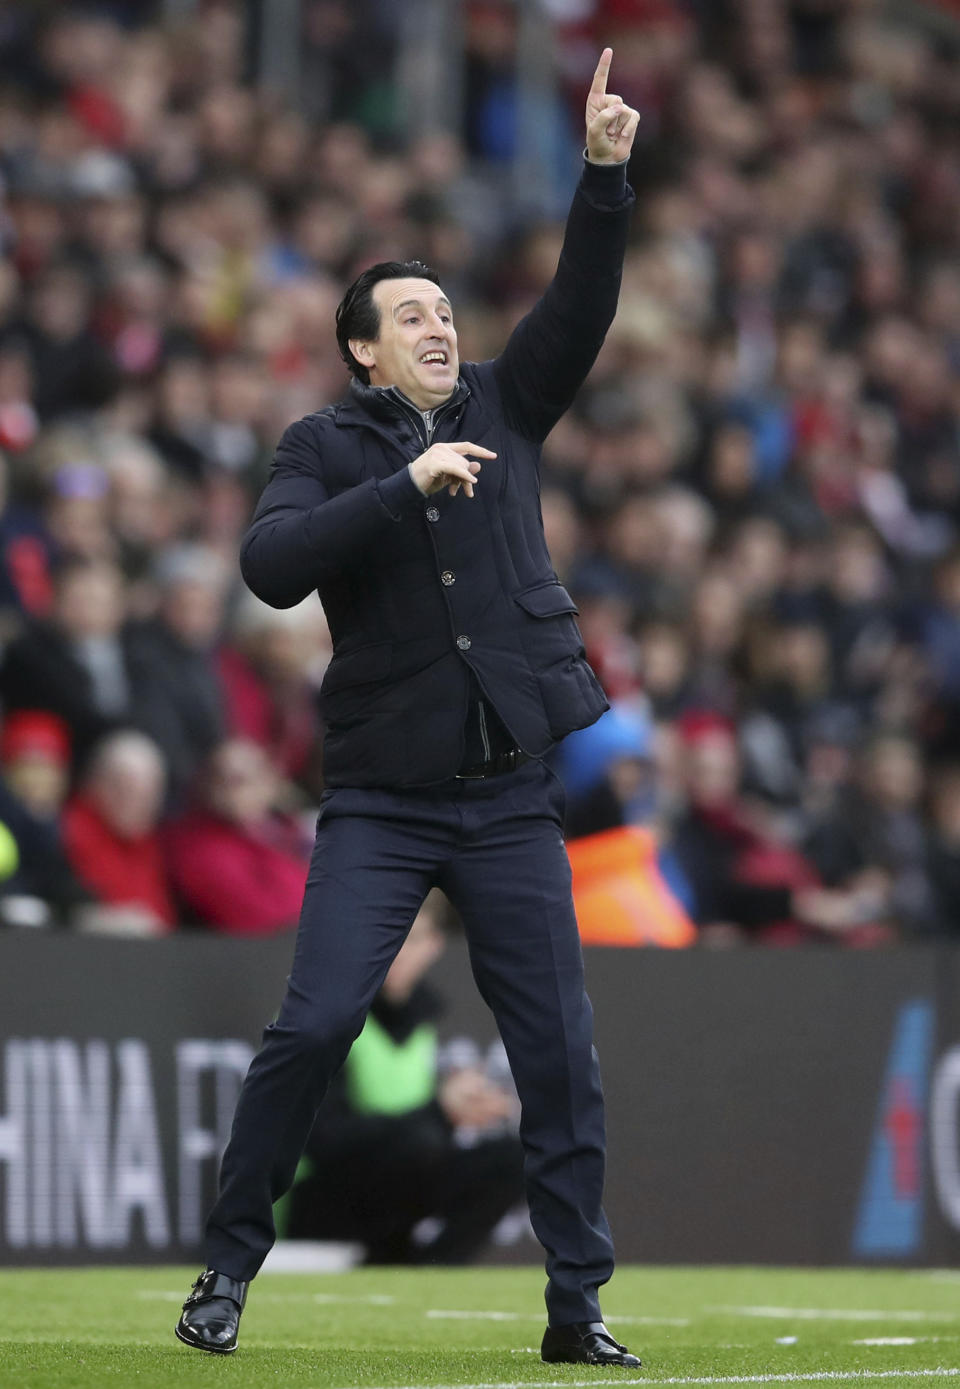 Arsenal manager Unai Emery gestures on the touchline during the game against Southampton during the English Premier League soccer match at St Mary's Stadium in Southampton, England, Sunday Dec. 16, 2018. (Adam Davy/PA via AP)